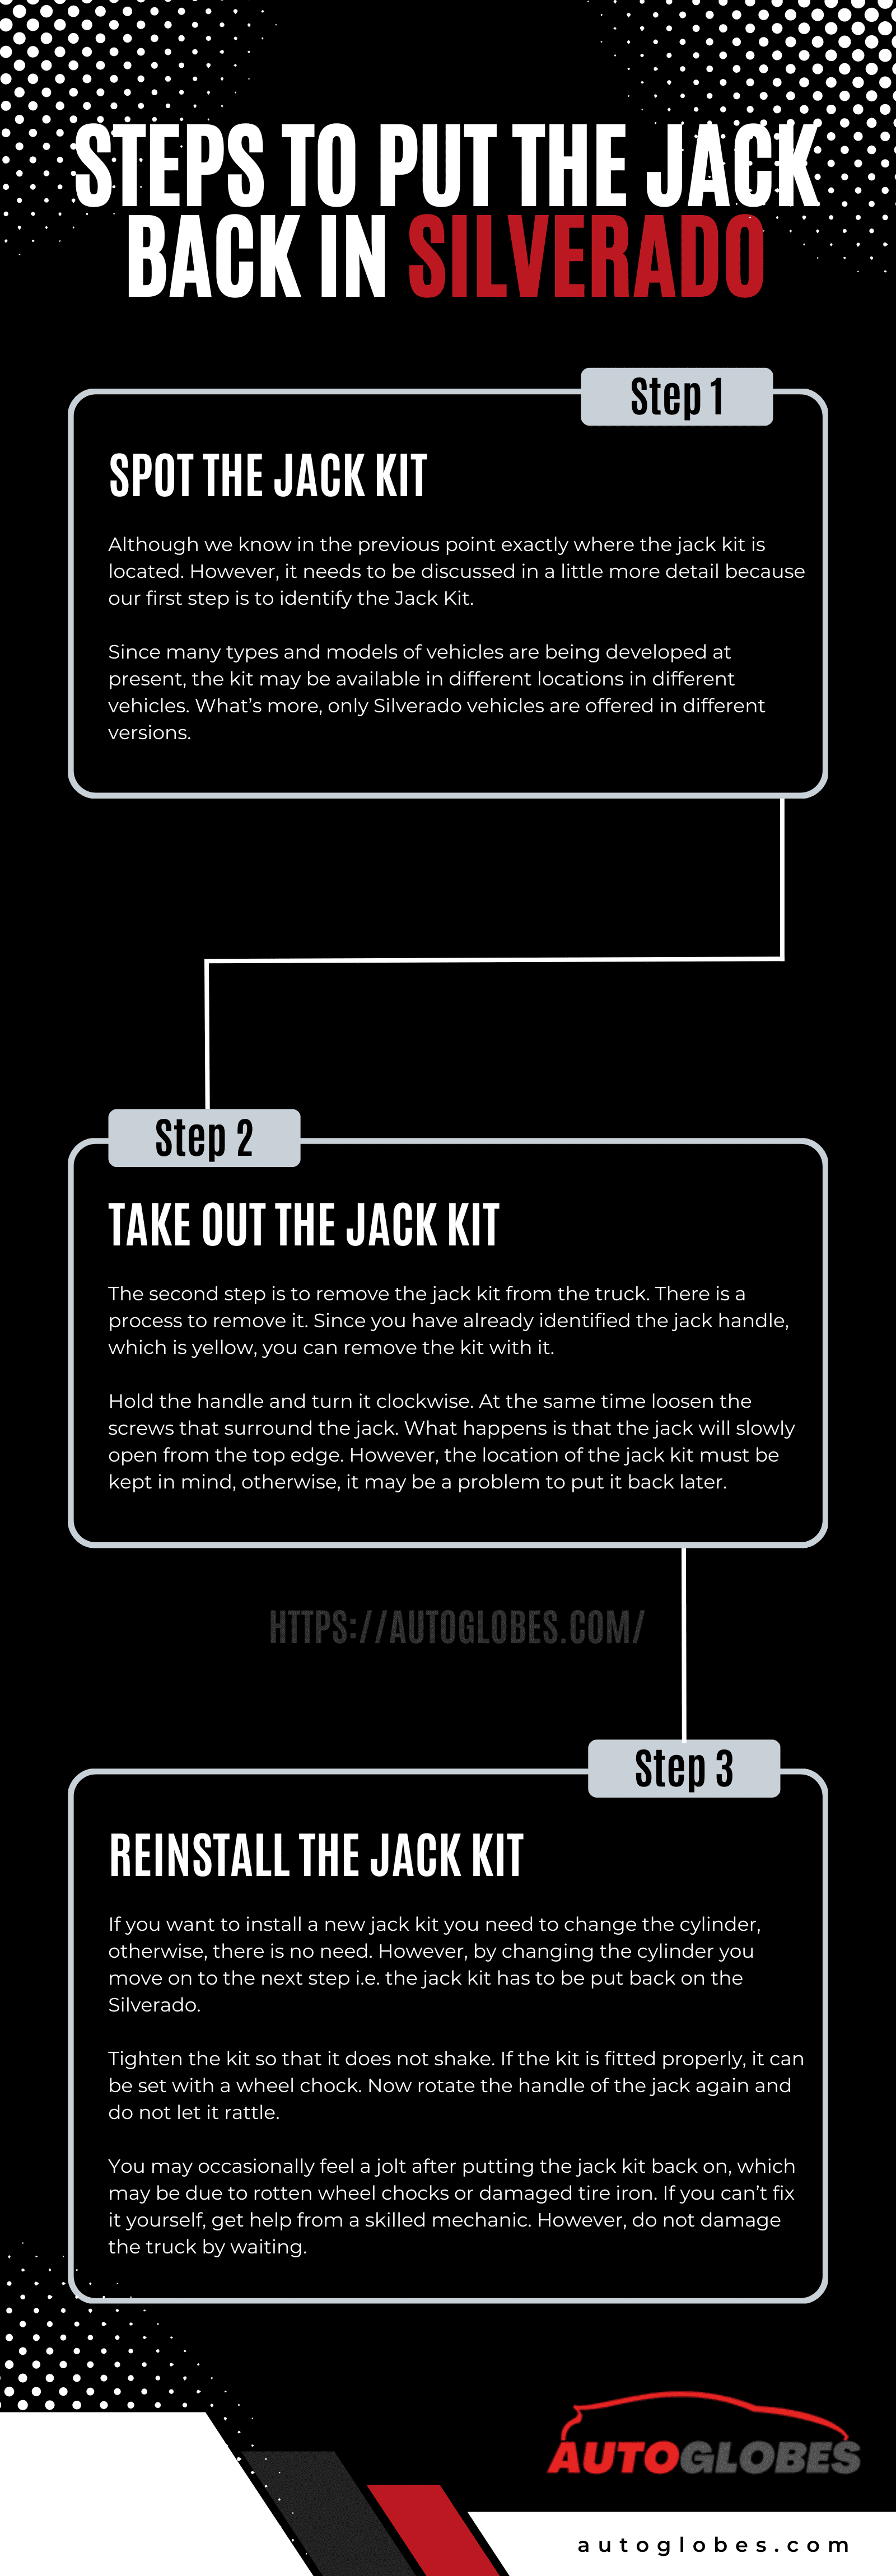 Steps To Put the Jack Back in Silverado Infographic